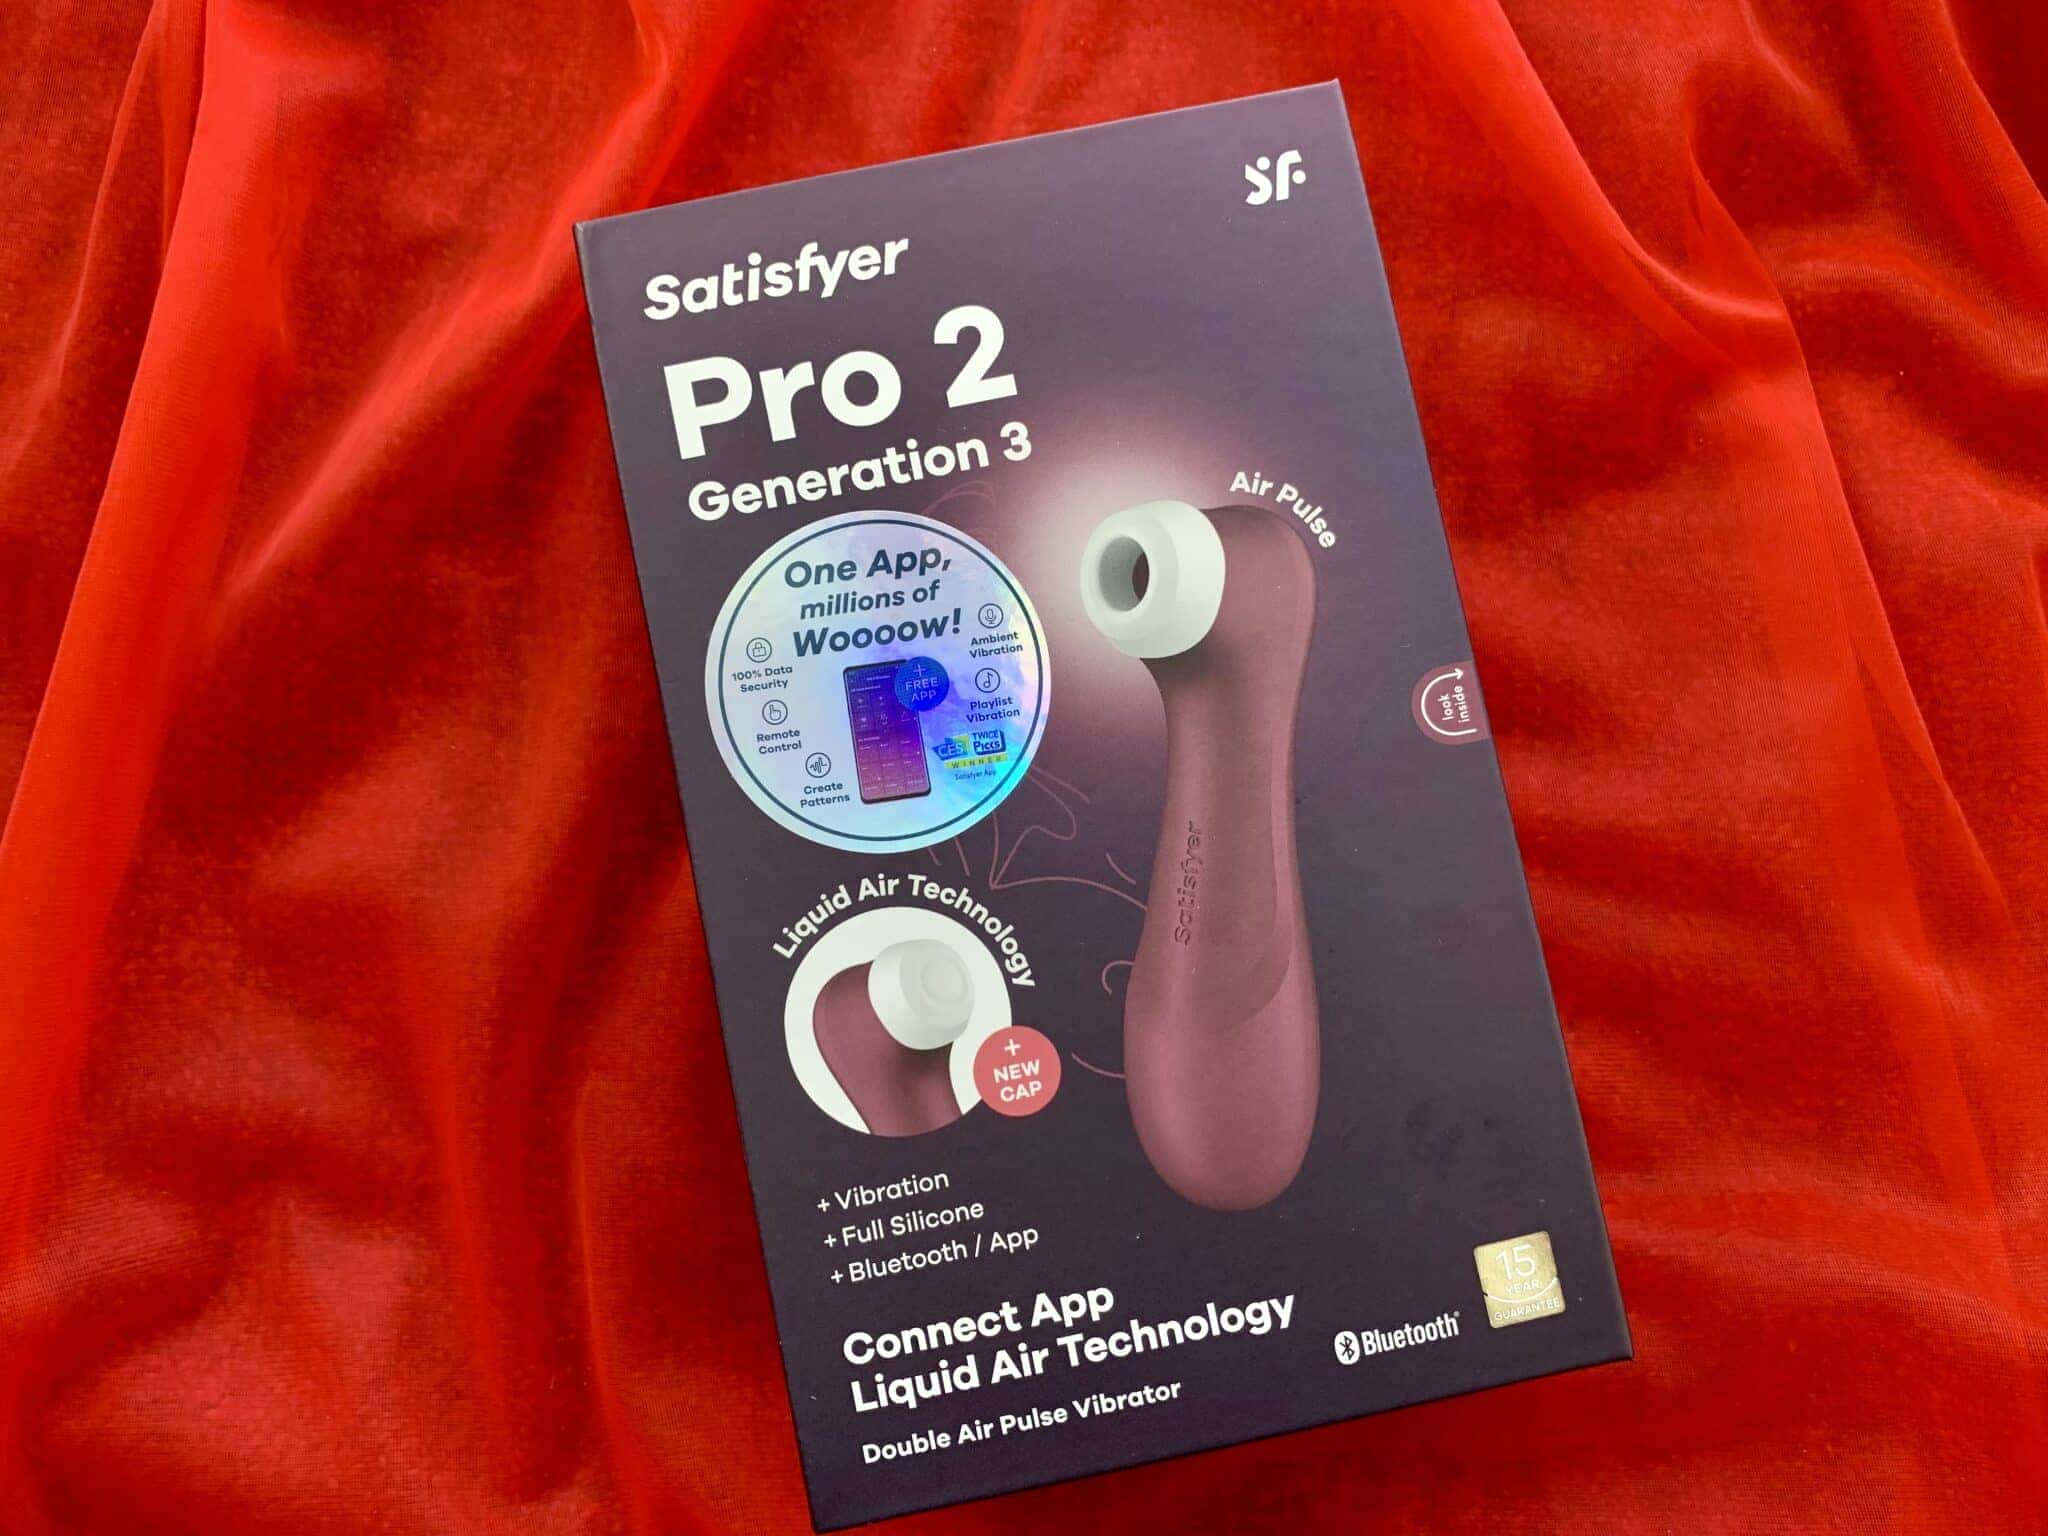 Satisfyer-Pro-2-Generation-3-Packaging-scaled